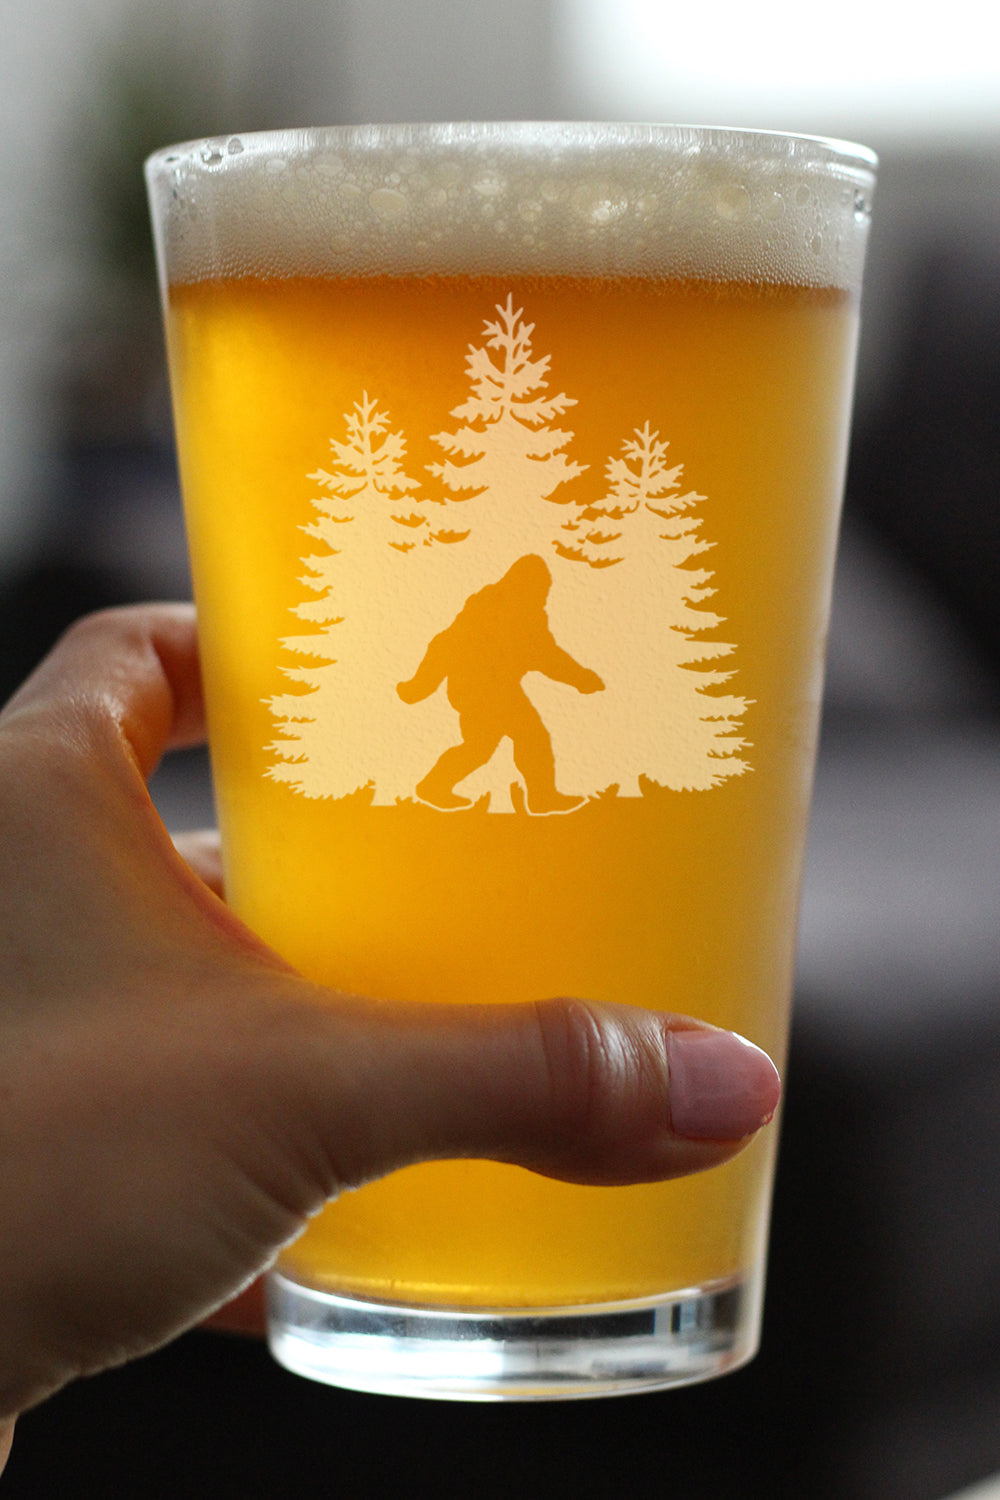 Bigfoot Engraved Pint Glass, Unique Sasquatch Themed Gifts, Funny Gift Idea for Outdoorsmen